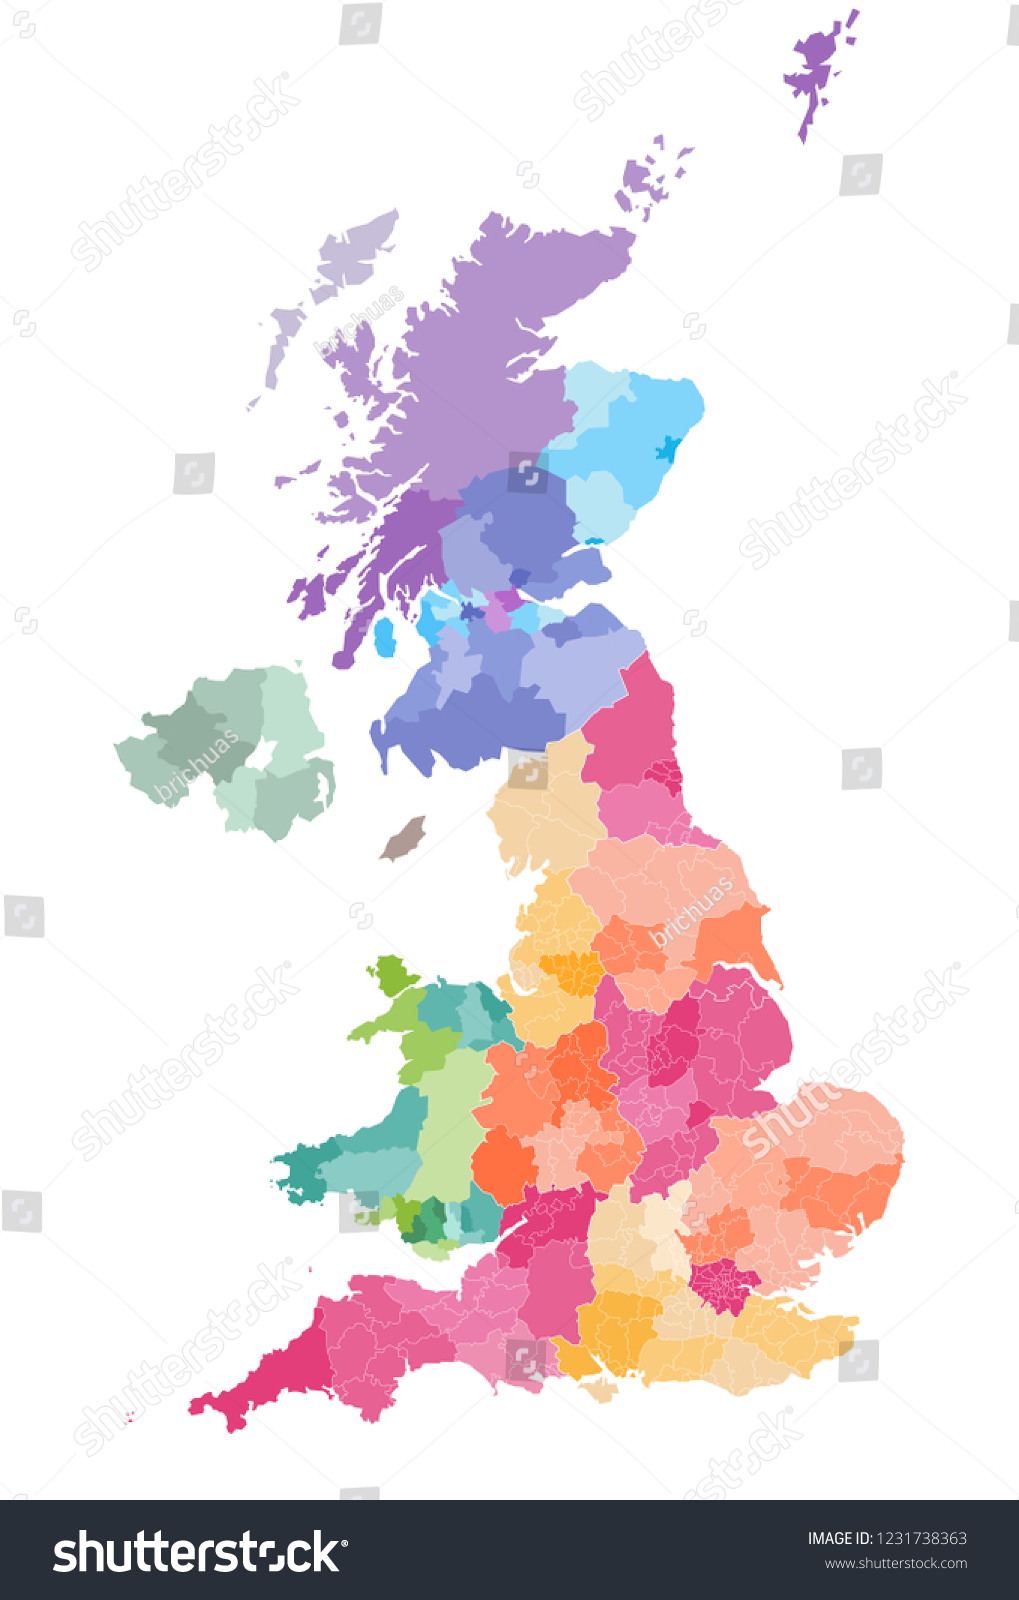 SVG of vector map of United Kingdom administrative divisions colored by countries and regions. Districts and counties map of England, Wales, Scotland and Northern Ireland svg